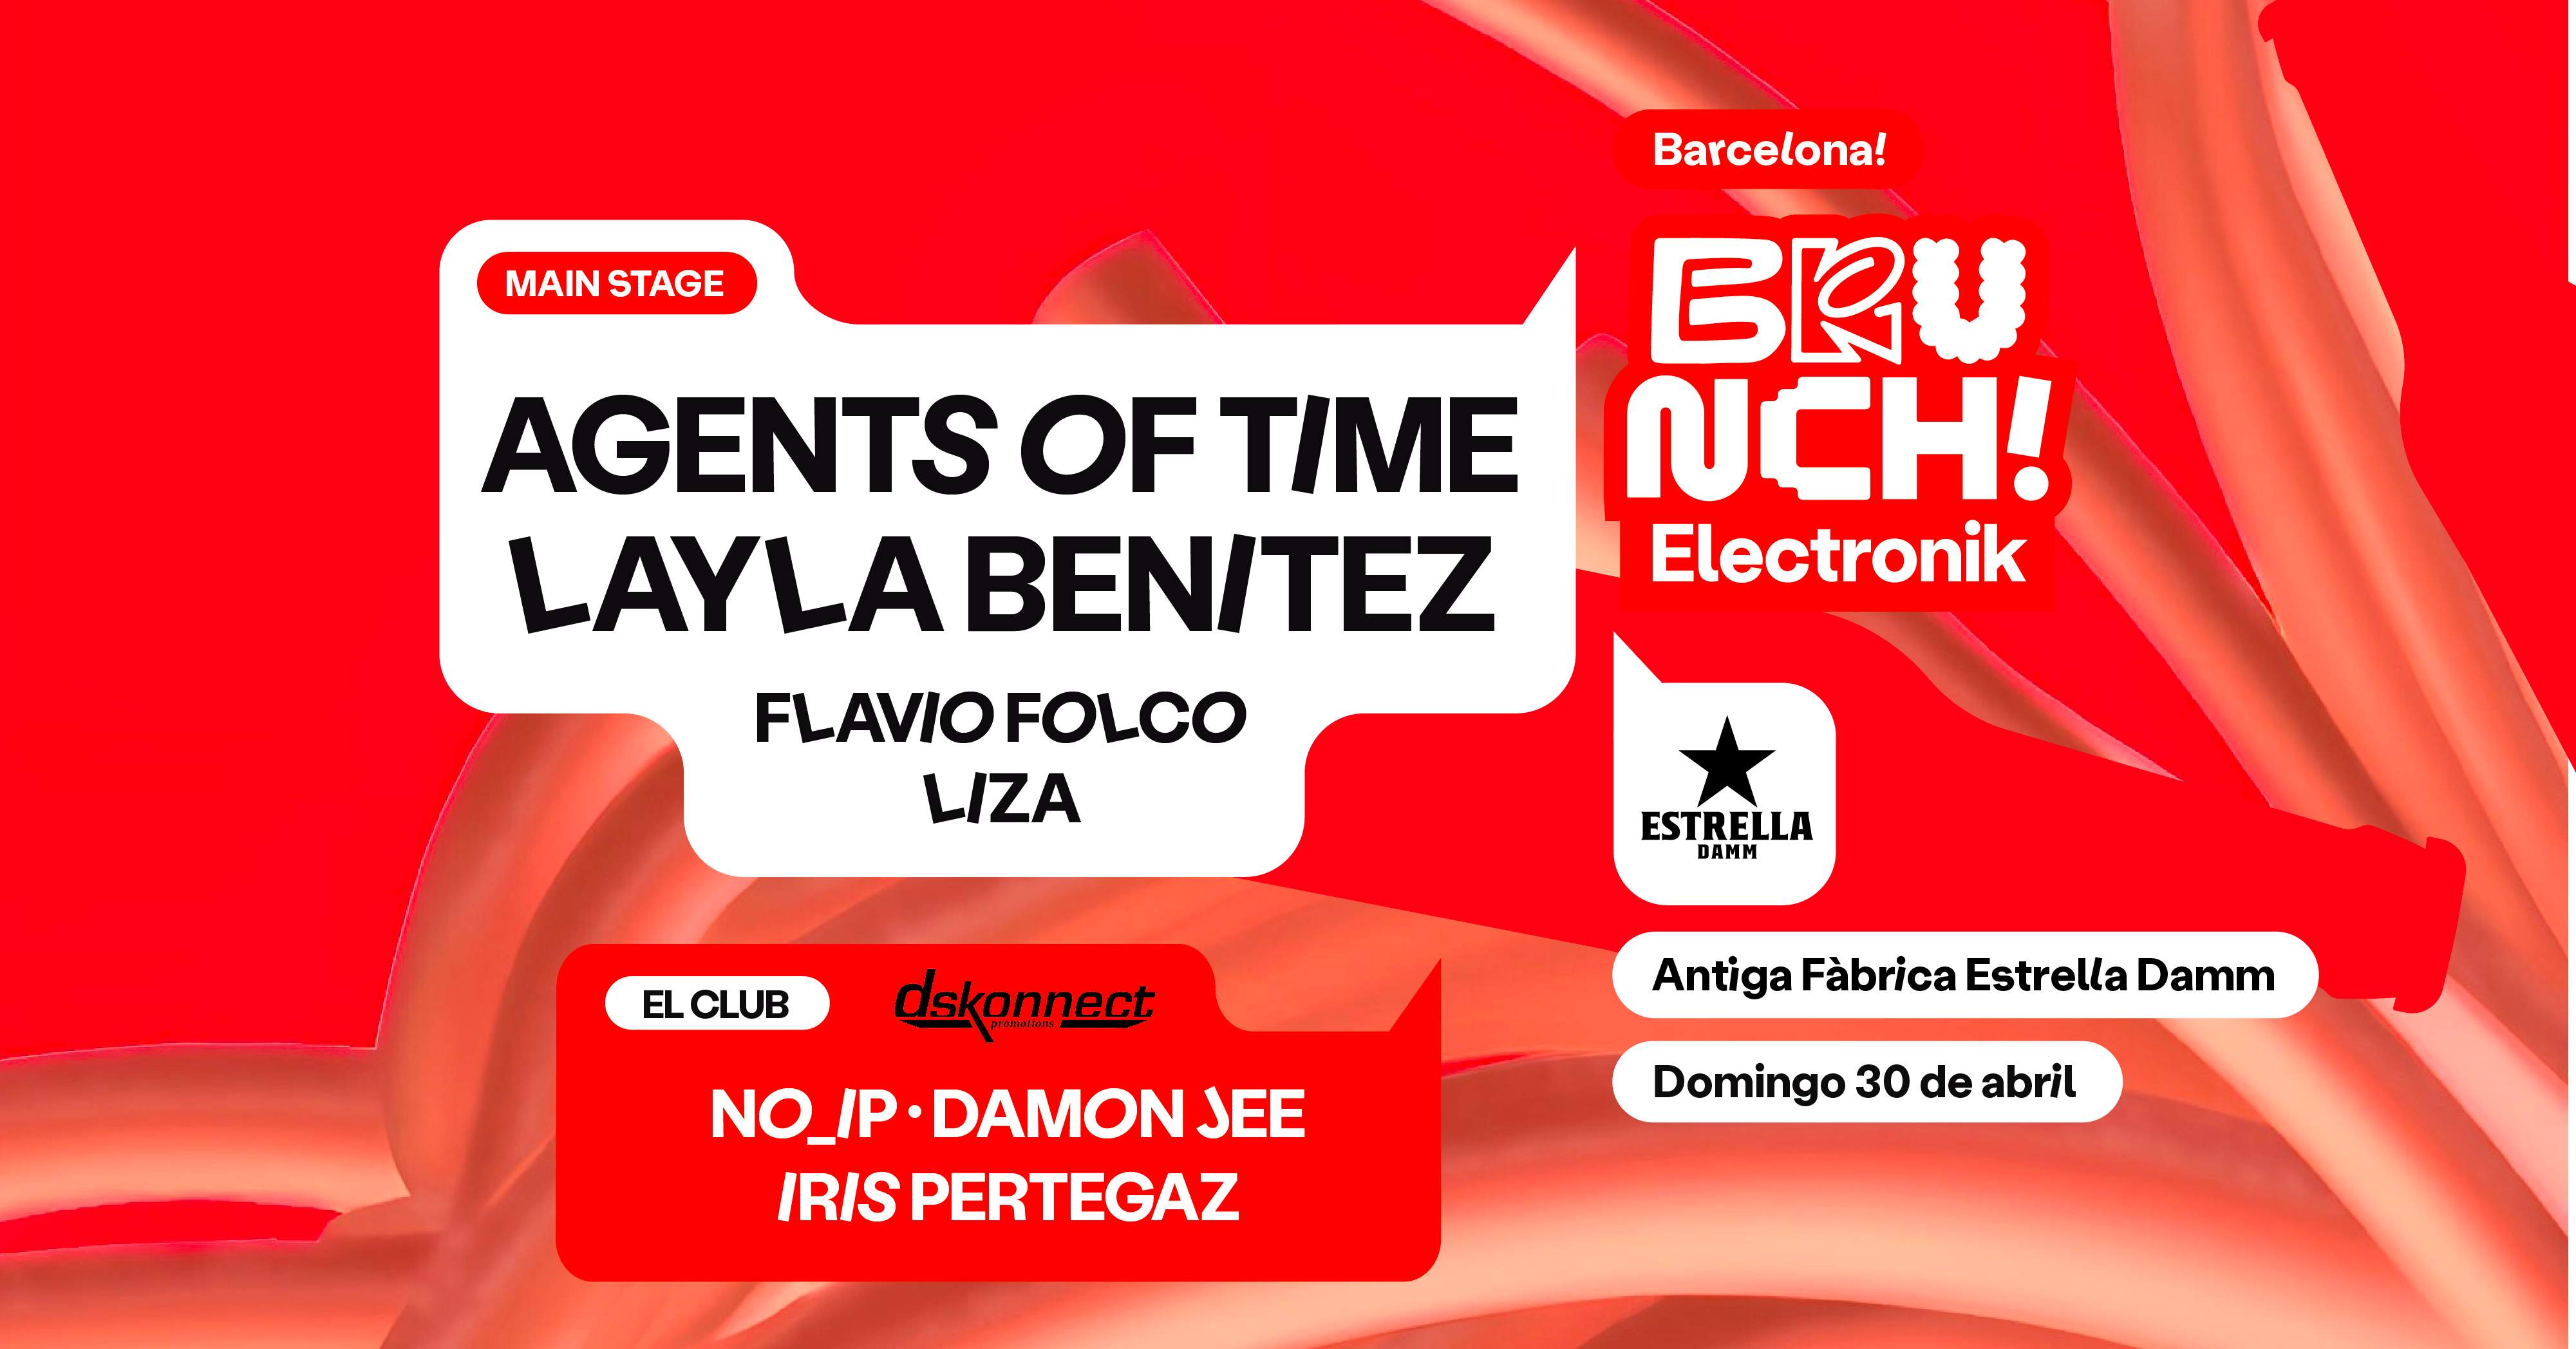 *SOLD OUT* Brunch Electronik #6: Agents Of Time, Layla Benitez y más - フライヤー裏